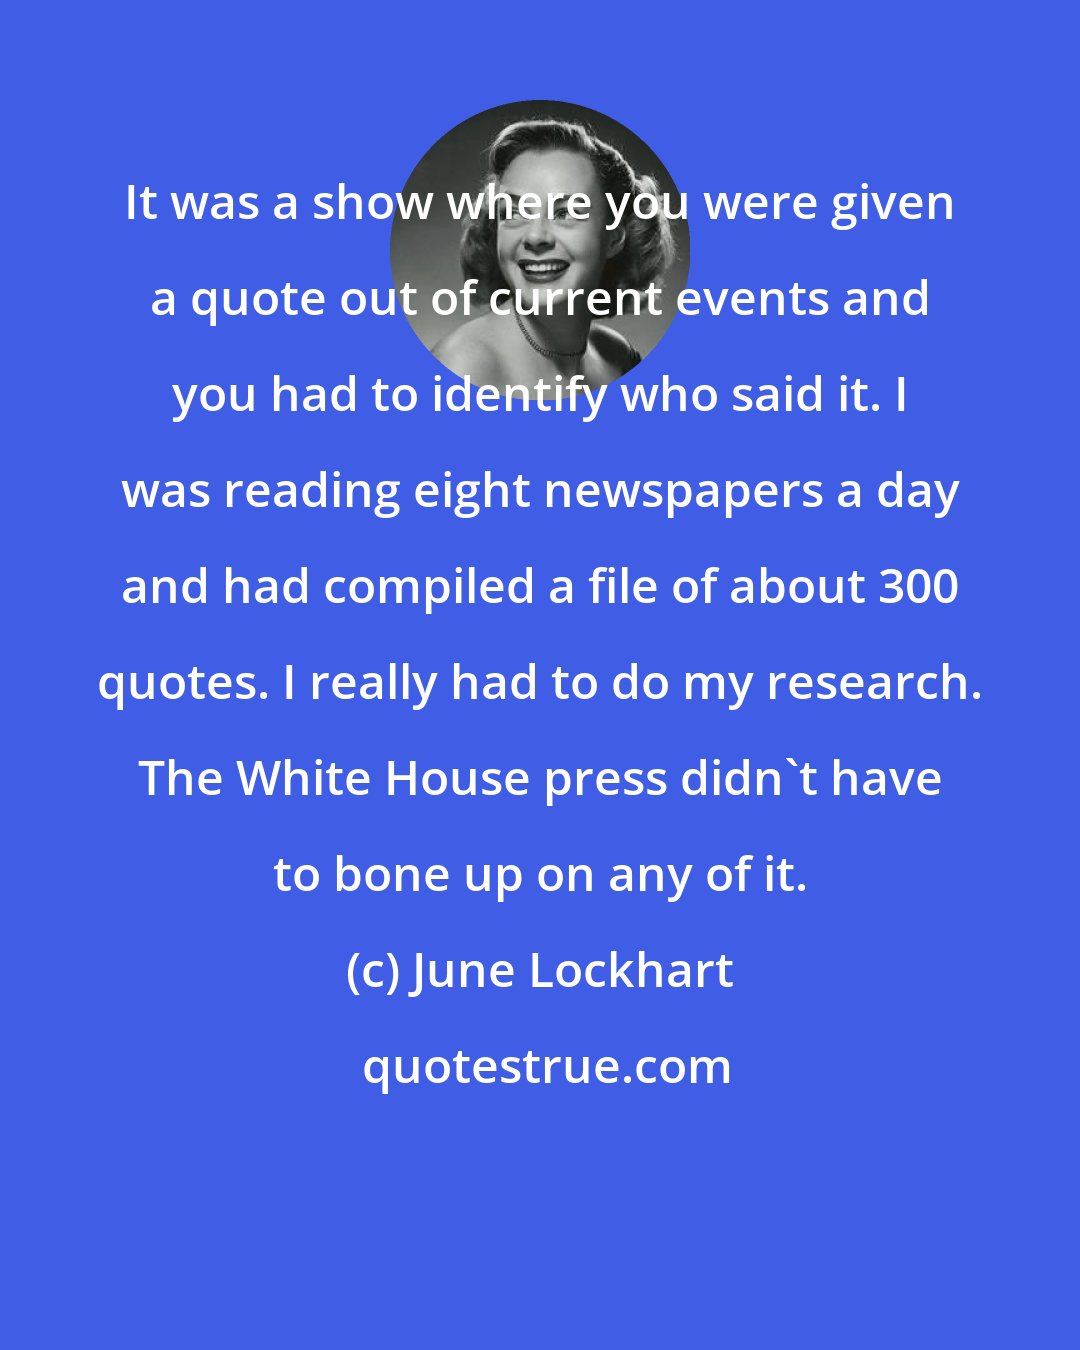 June Lockhart: It was a show where you were given a quote out of current events and you had to identify who said it. I was reading eight newspapers a day and had compiled a file of about 300 quotes. I really had to do my research. The White House press didn't have to bone up on any of it.